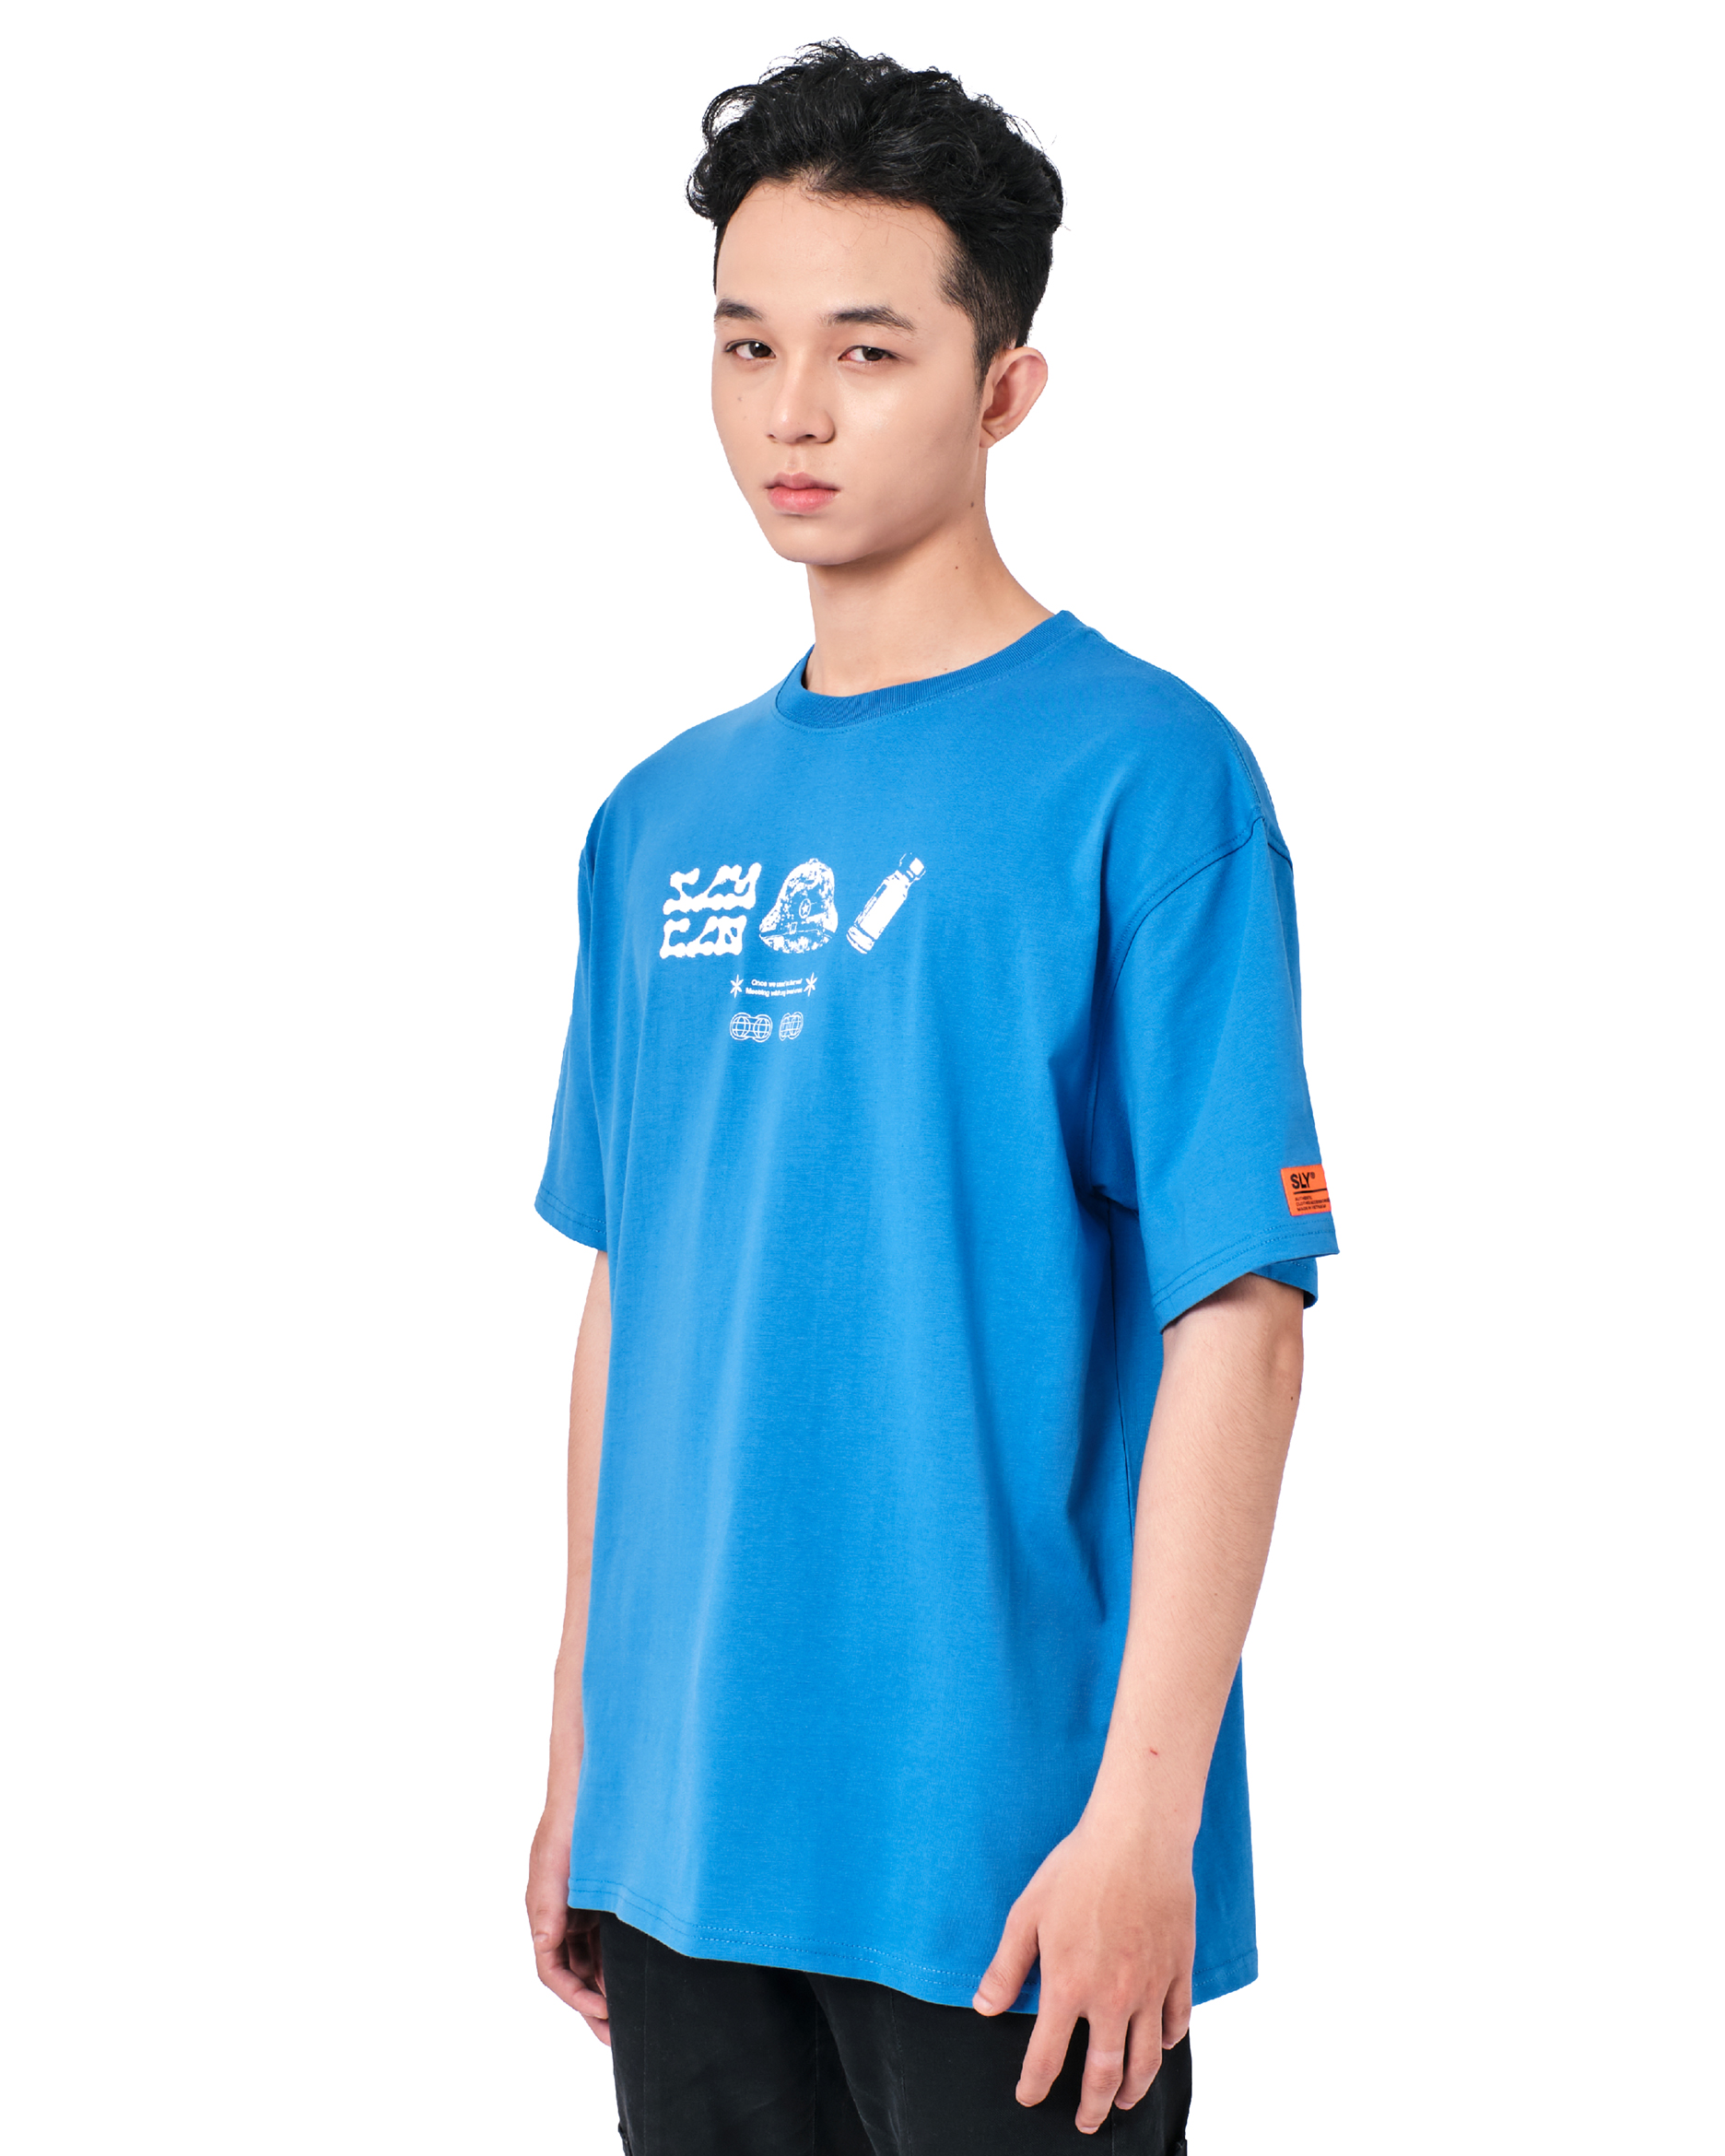 T-shirt Abstract blue 16